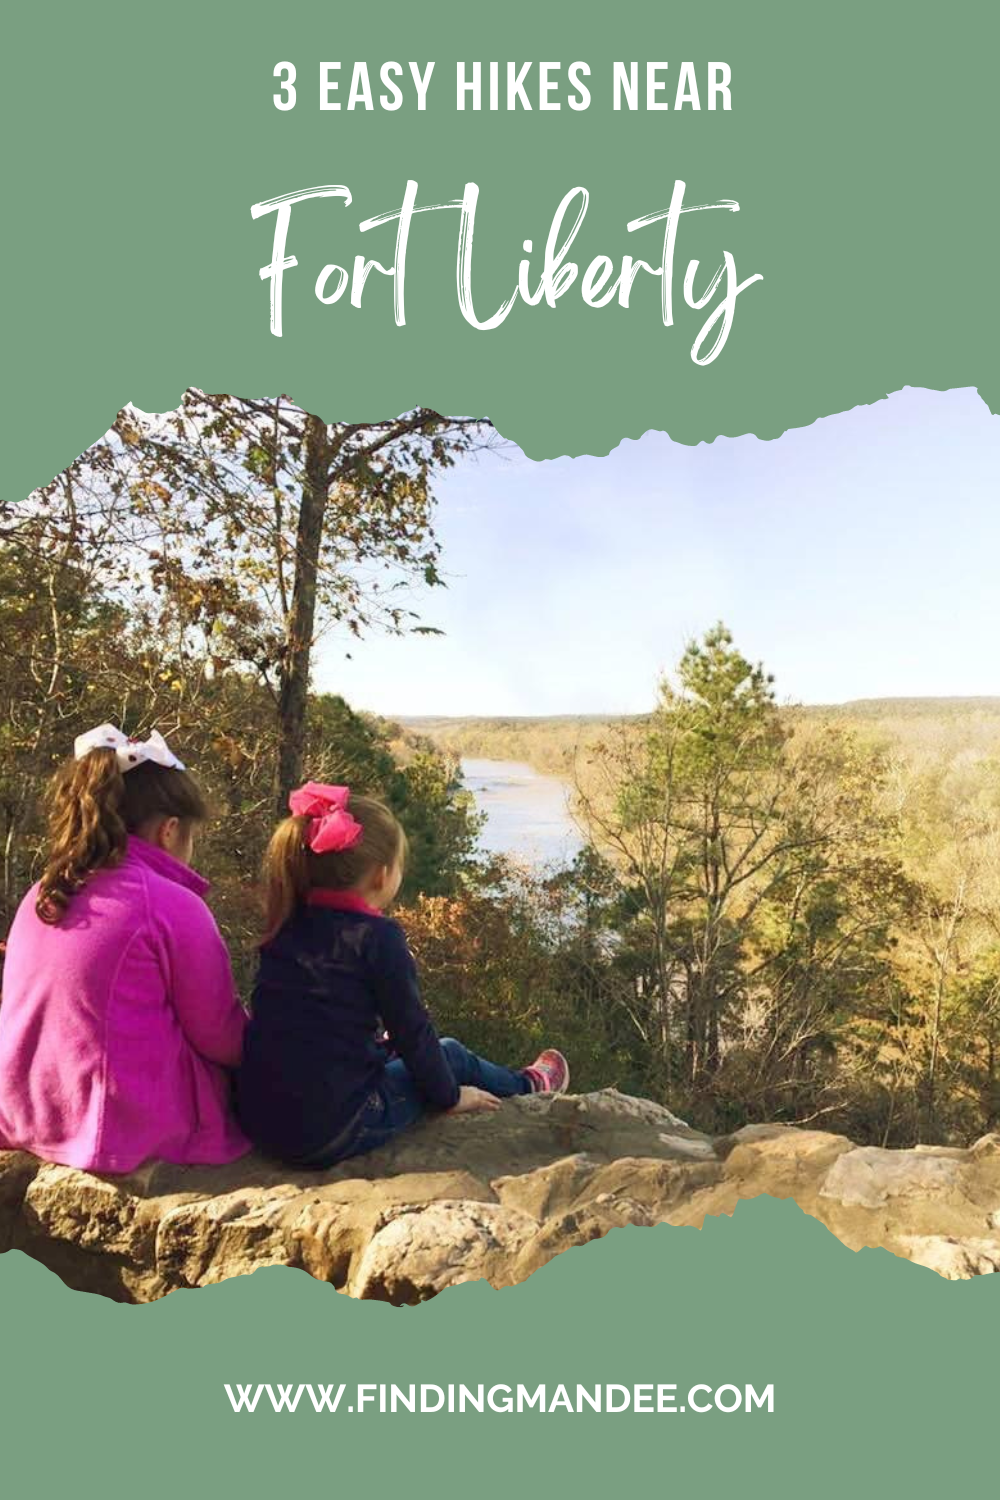 3 Easy Hikes Near Fort Liberty | Finding Mandee